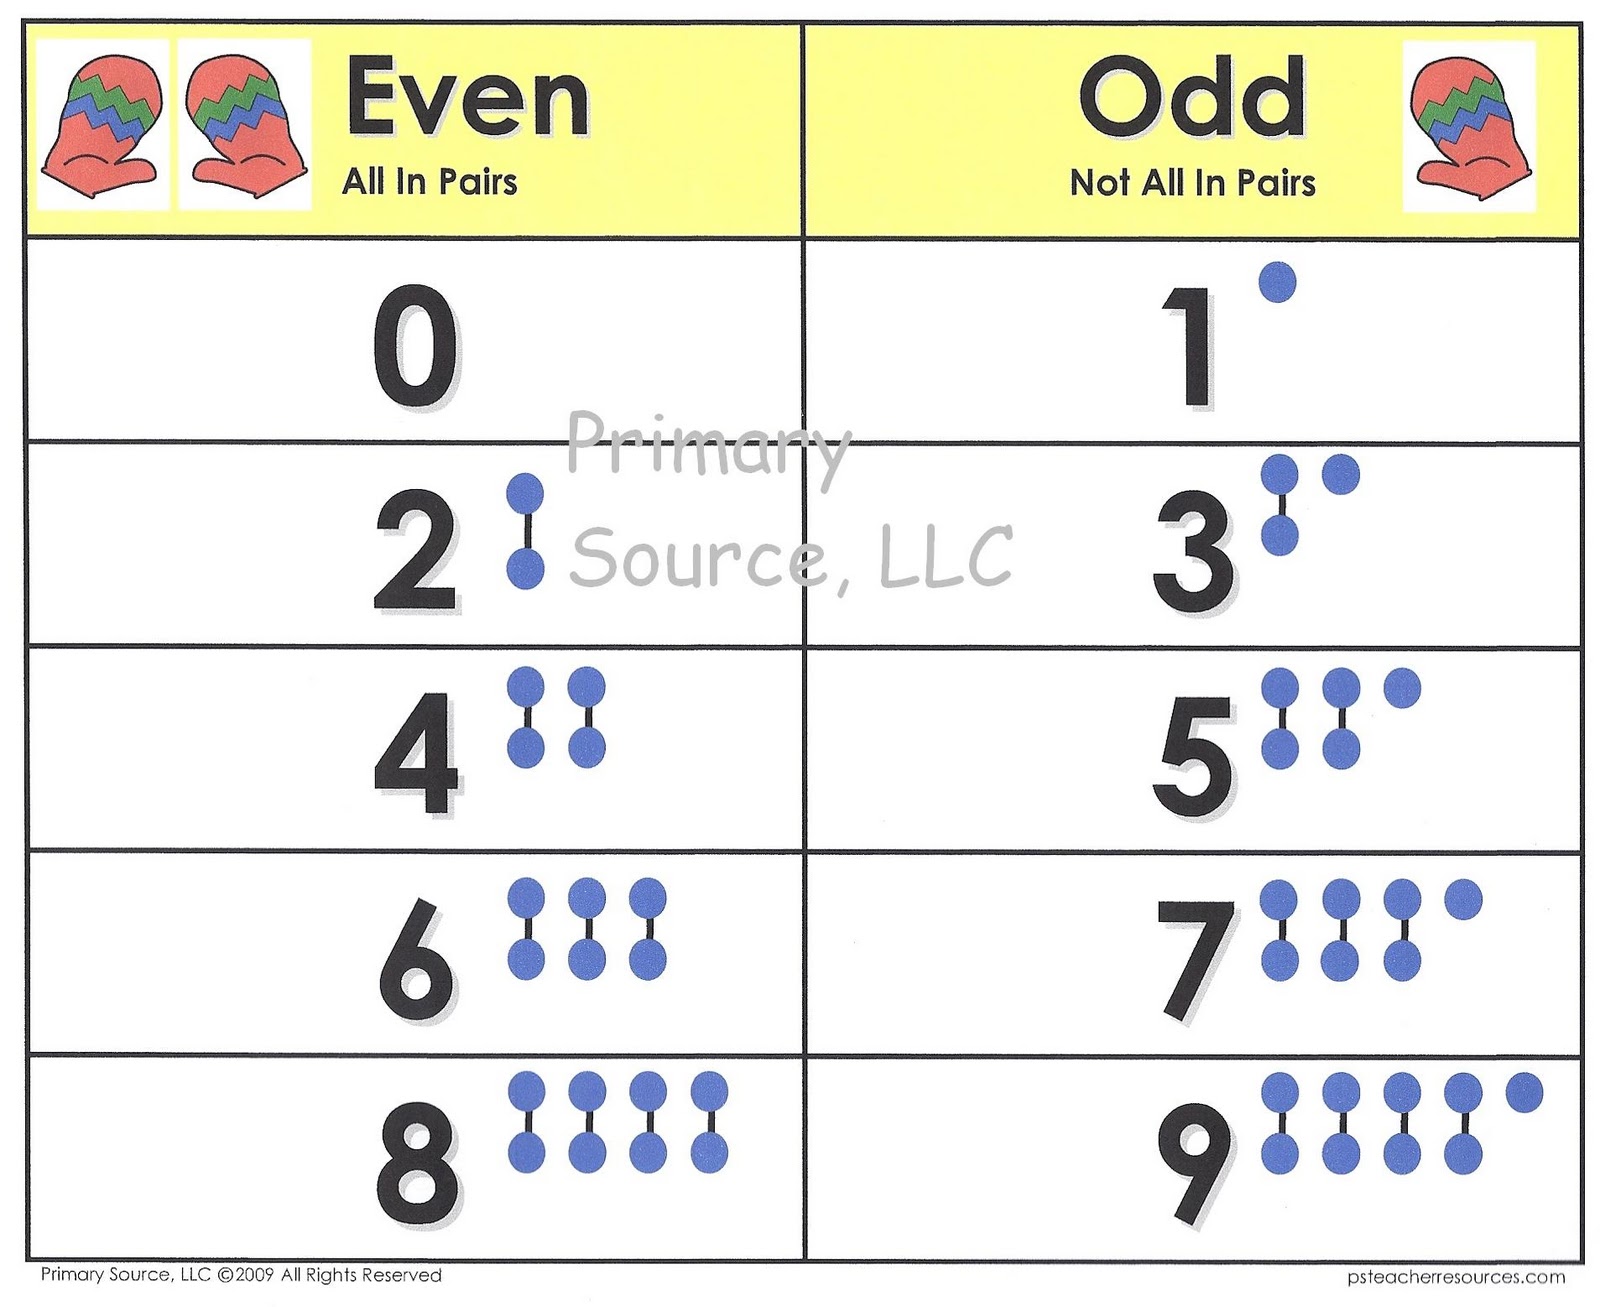 Ms. Elaine's Class Year 4.1: Odd and Even Numbers